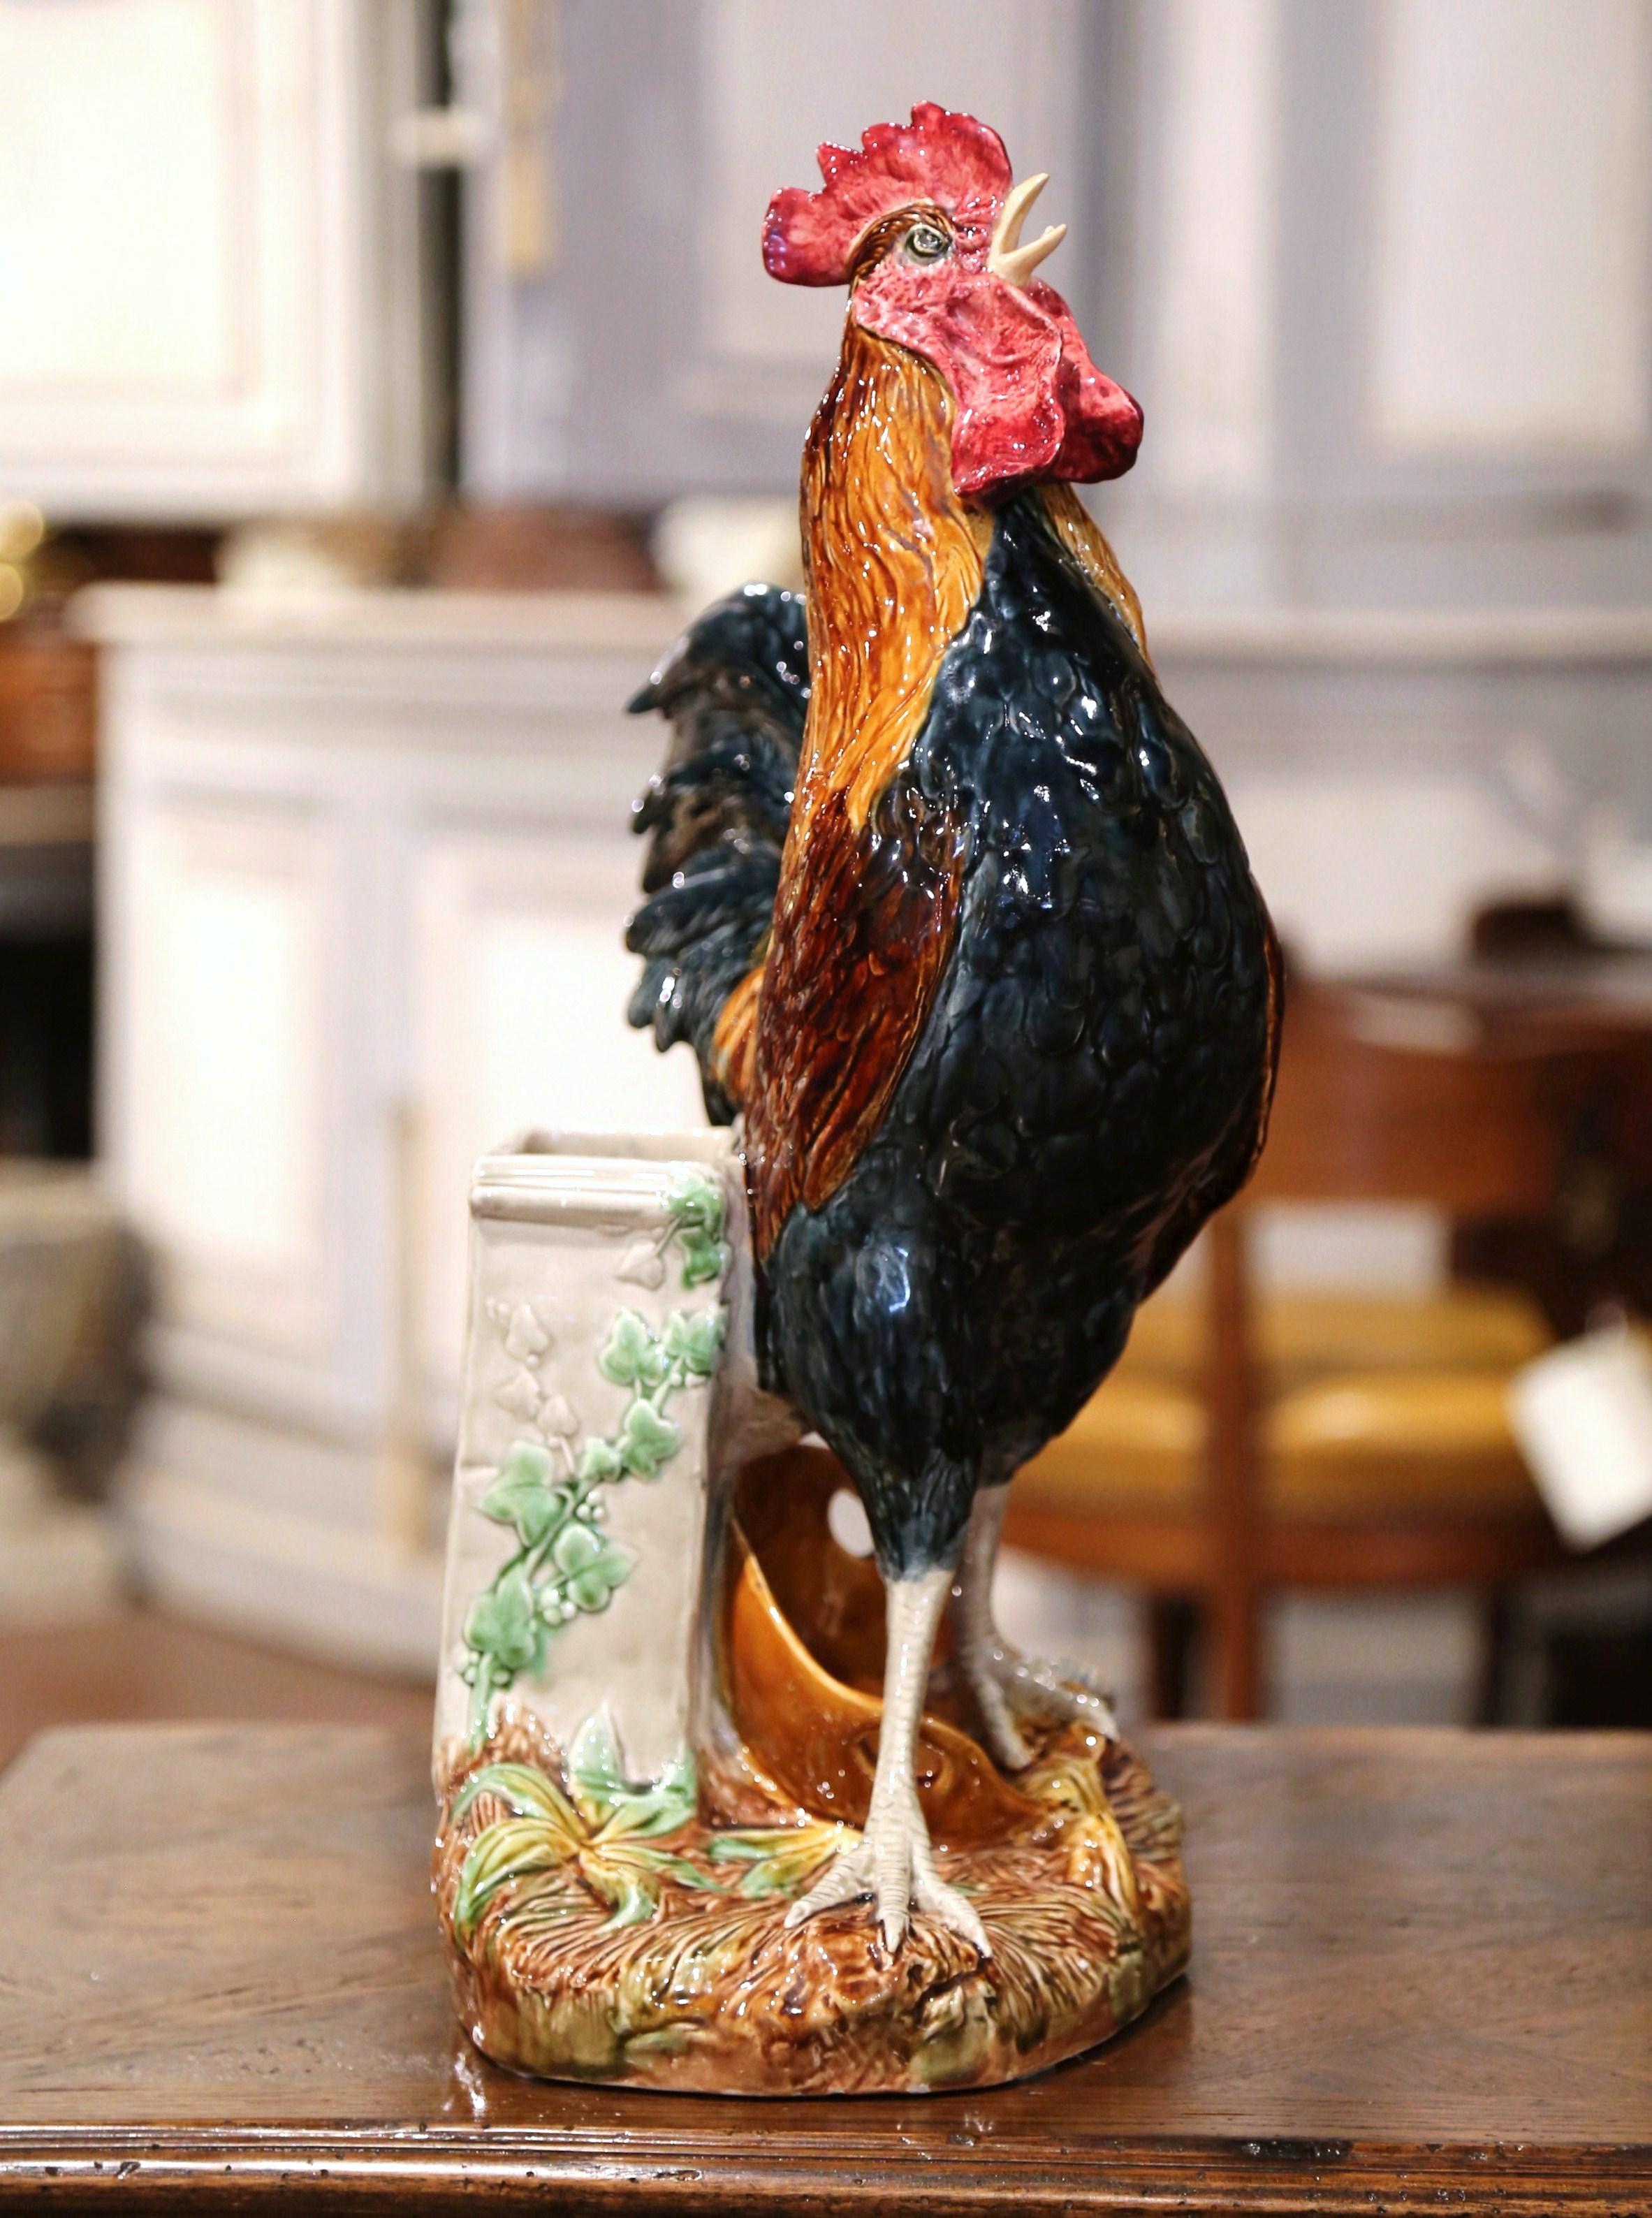 Add the charm of the French countryside to your home with this large, colorful barbotine rooster sculpture. Crafted in Choisy, France, circa 1890, the majolica composition is at once a flower vase and a ceramic rooster sculpture. The elegant piece